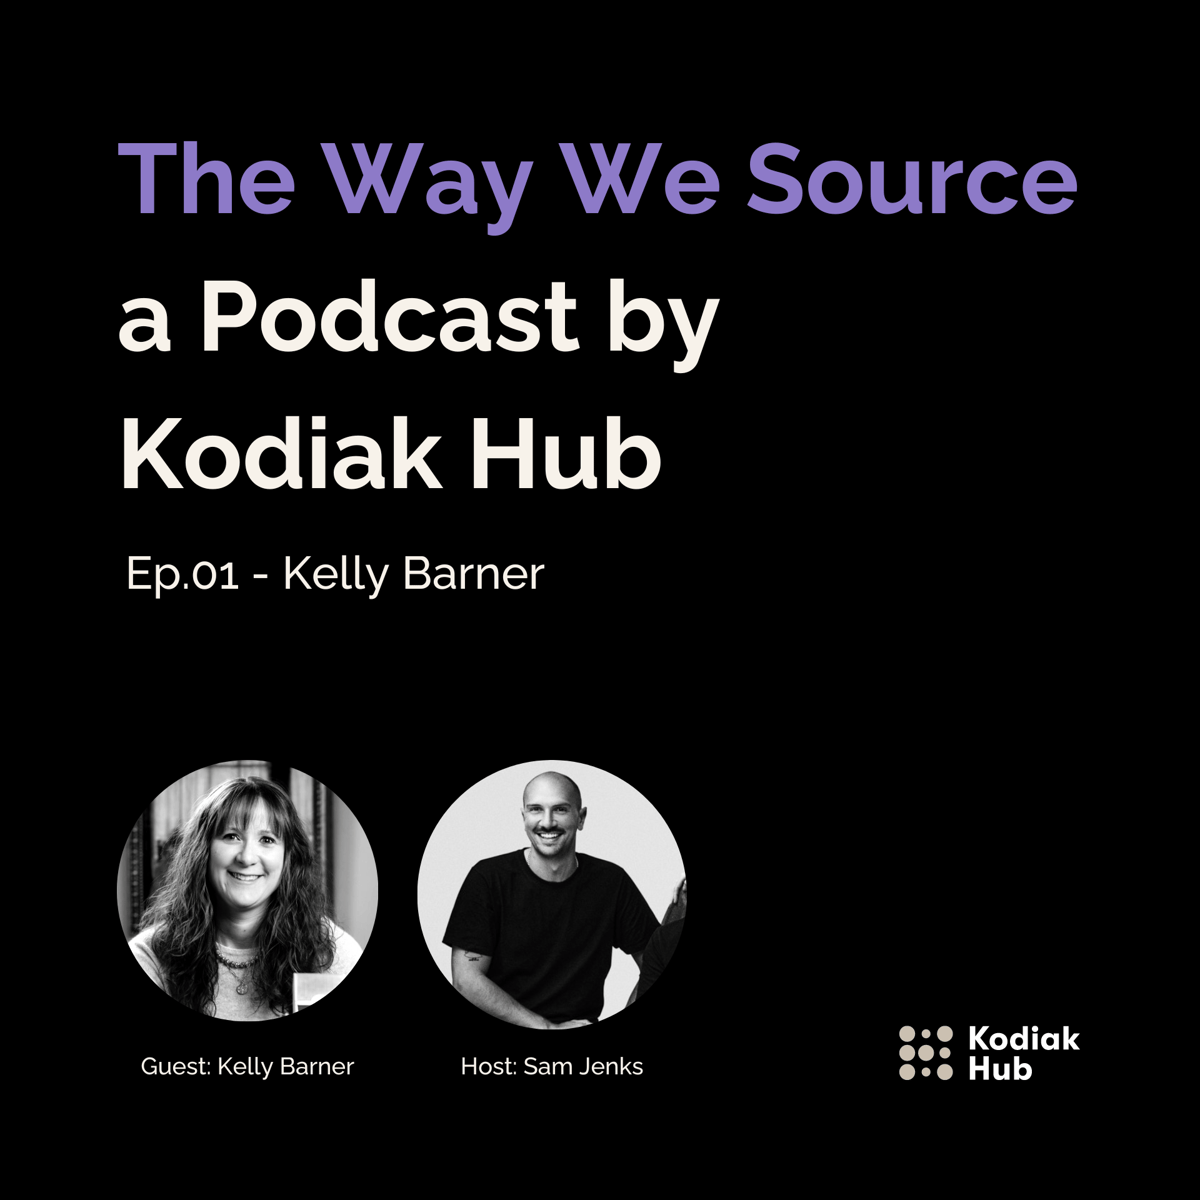 The Way We Source Podcast - Kelly Barner